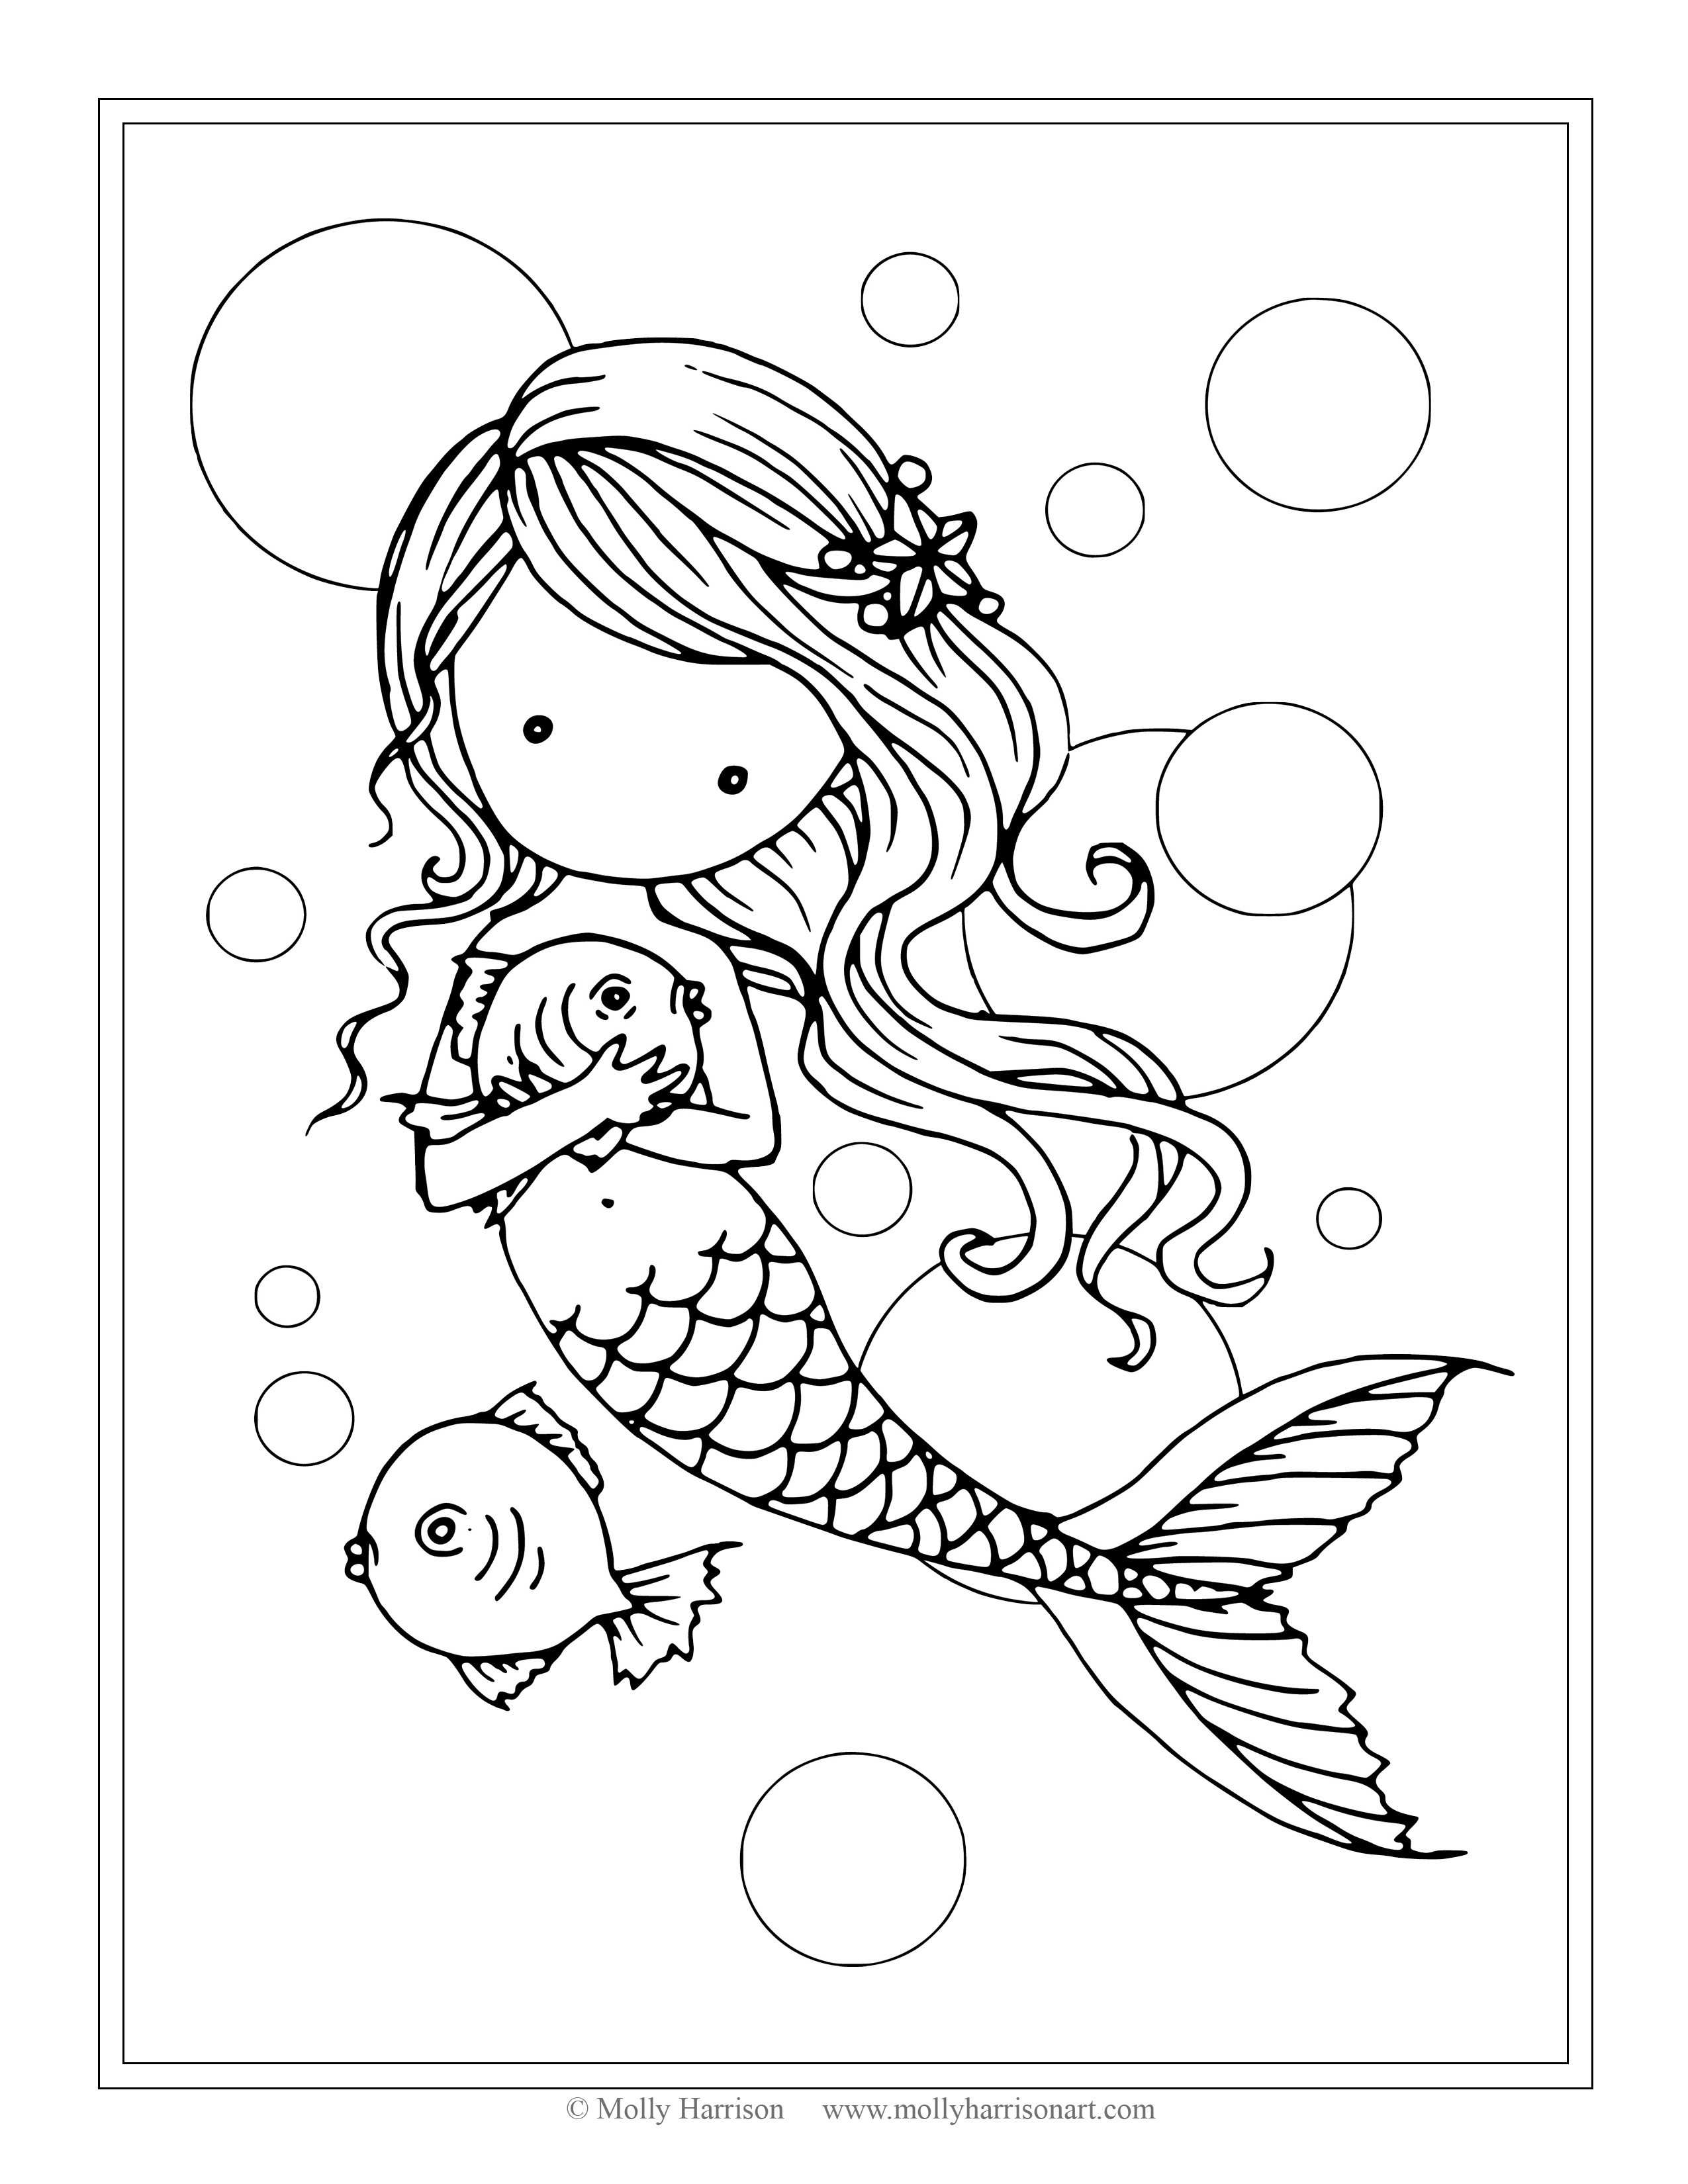 Detailed Mermaid Coloring Pages Realistic Mermaids Coloring Pages For Kids With Coloring Pages 52